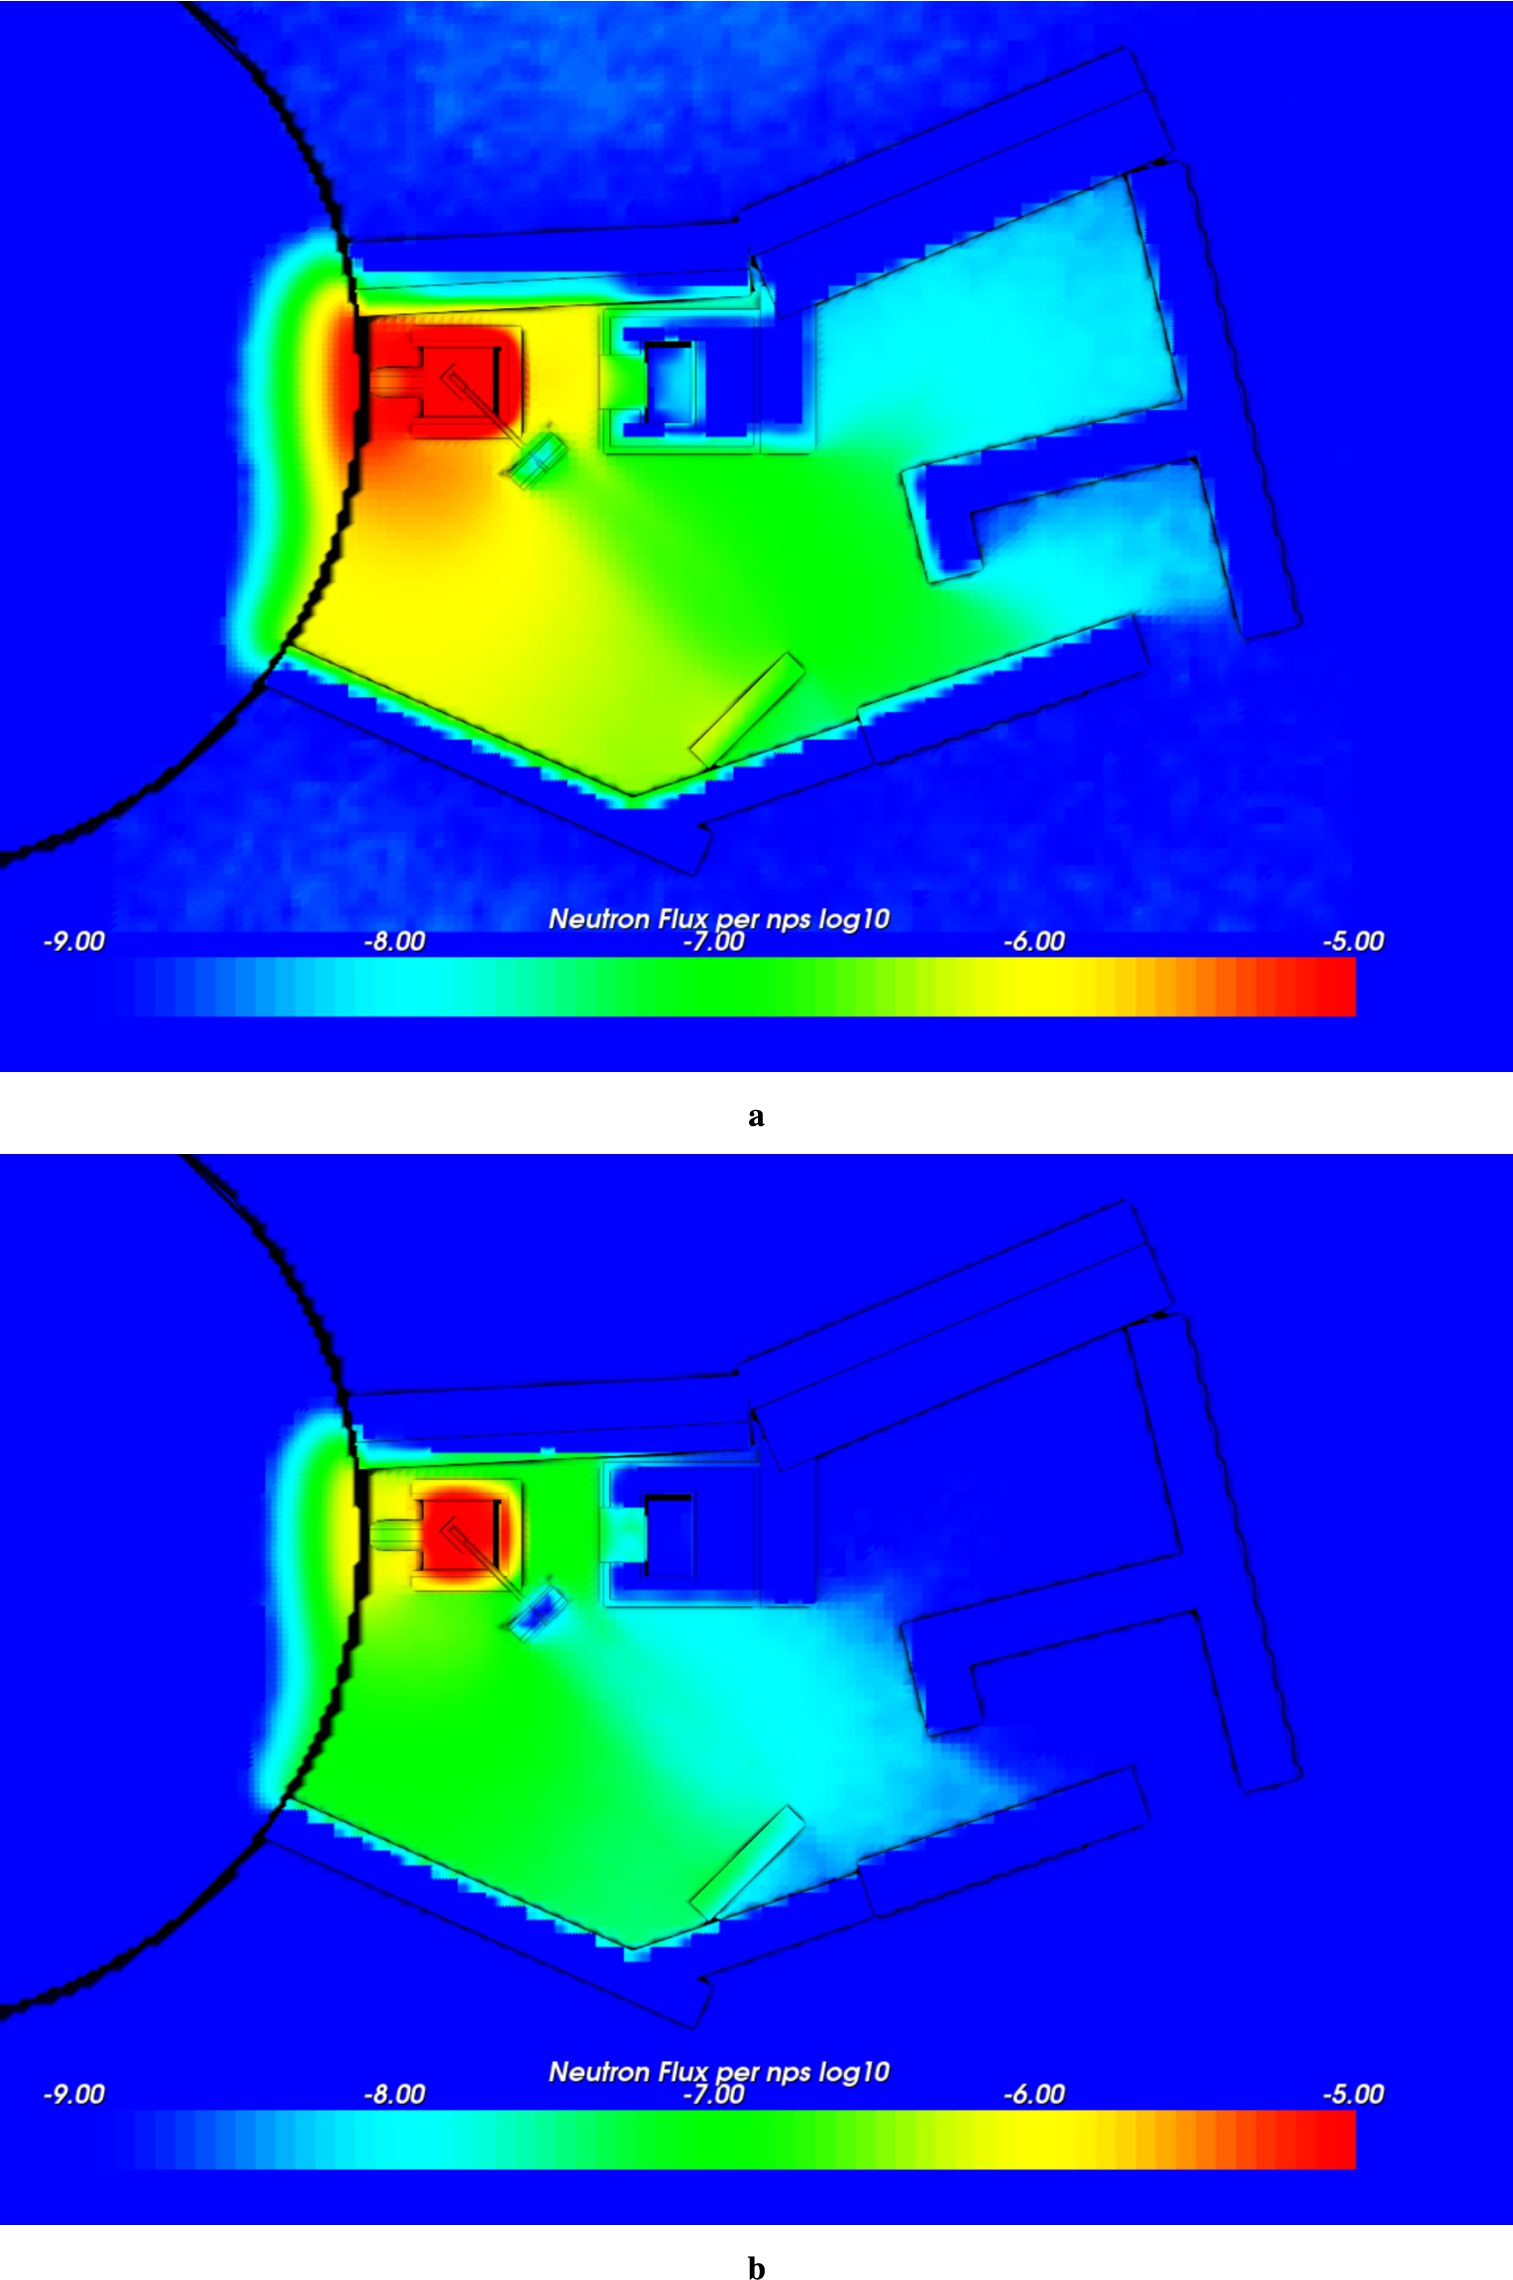 Neutron flux map at the moderator height with a spatial resolution of 10 cm × 10 cm × 10 cm for (a) thermal neutrons (13 meV to 81.8 meV) (b) cold neutrons (5.11 meV to 13 meV). Units are n/cm2/nps in log scale.